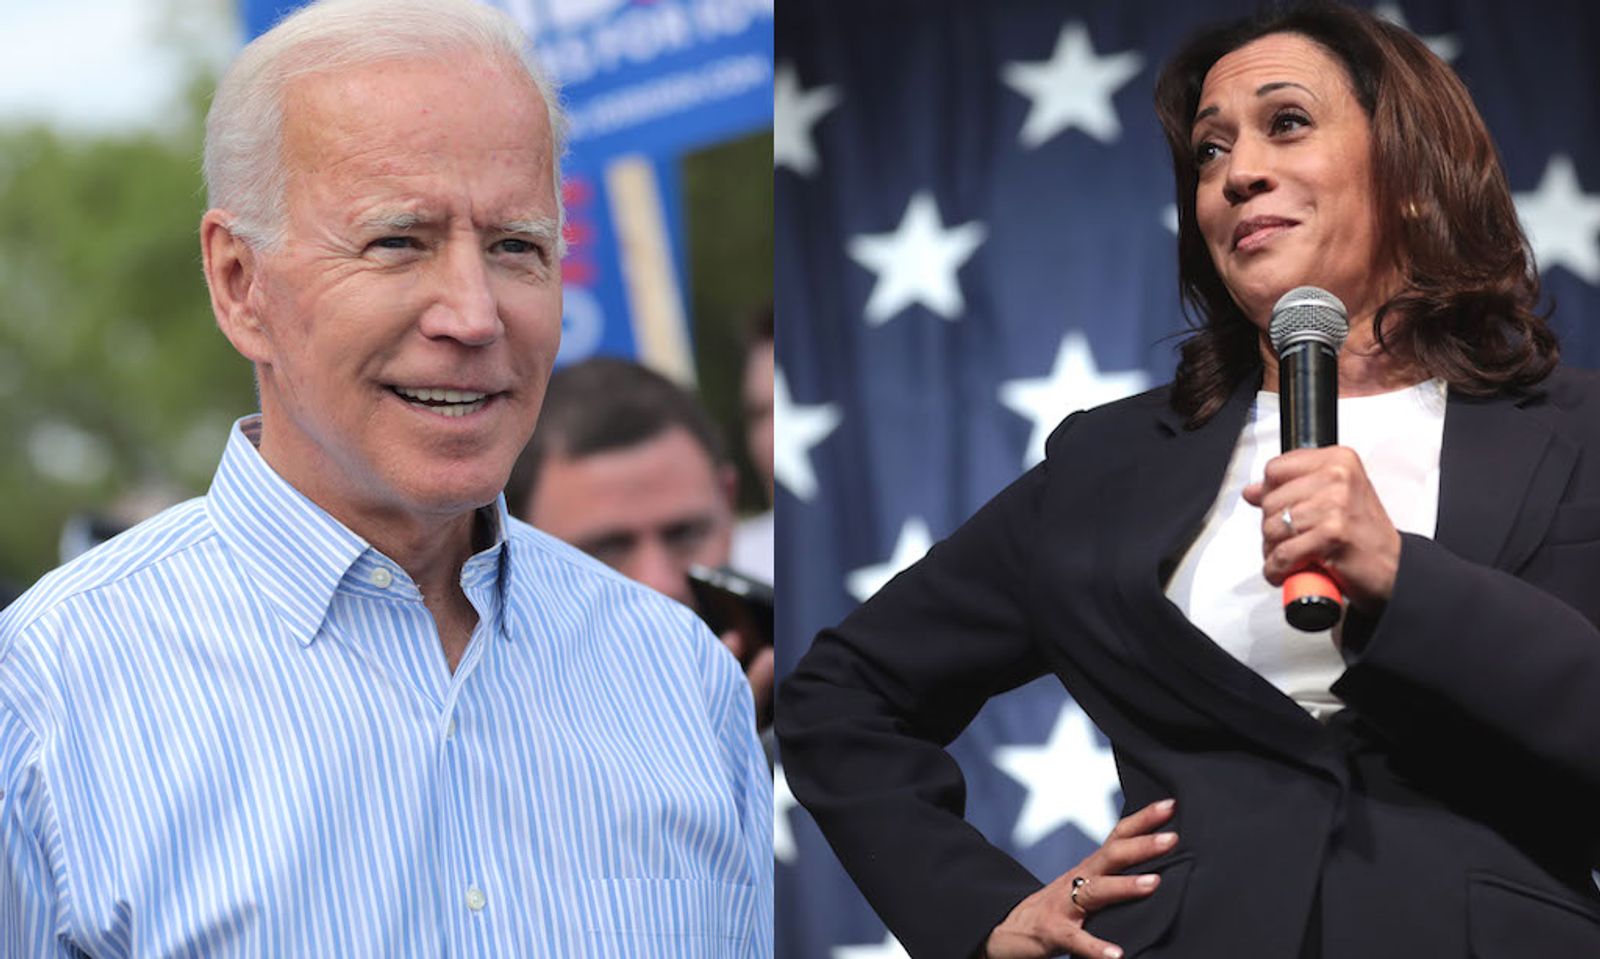 Section 230 & Online Rights: Here’s How Biden & Harris Stand